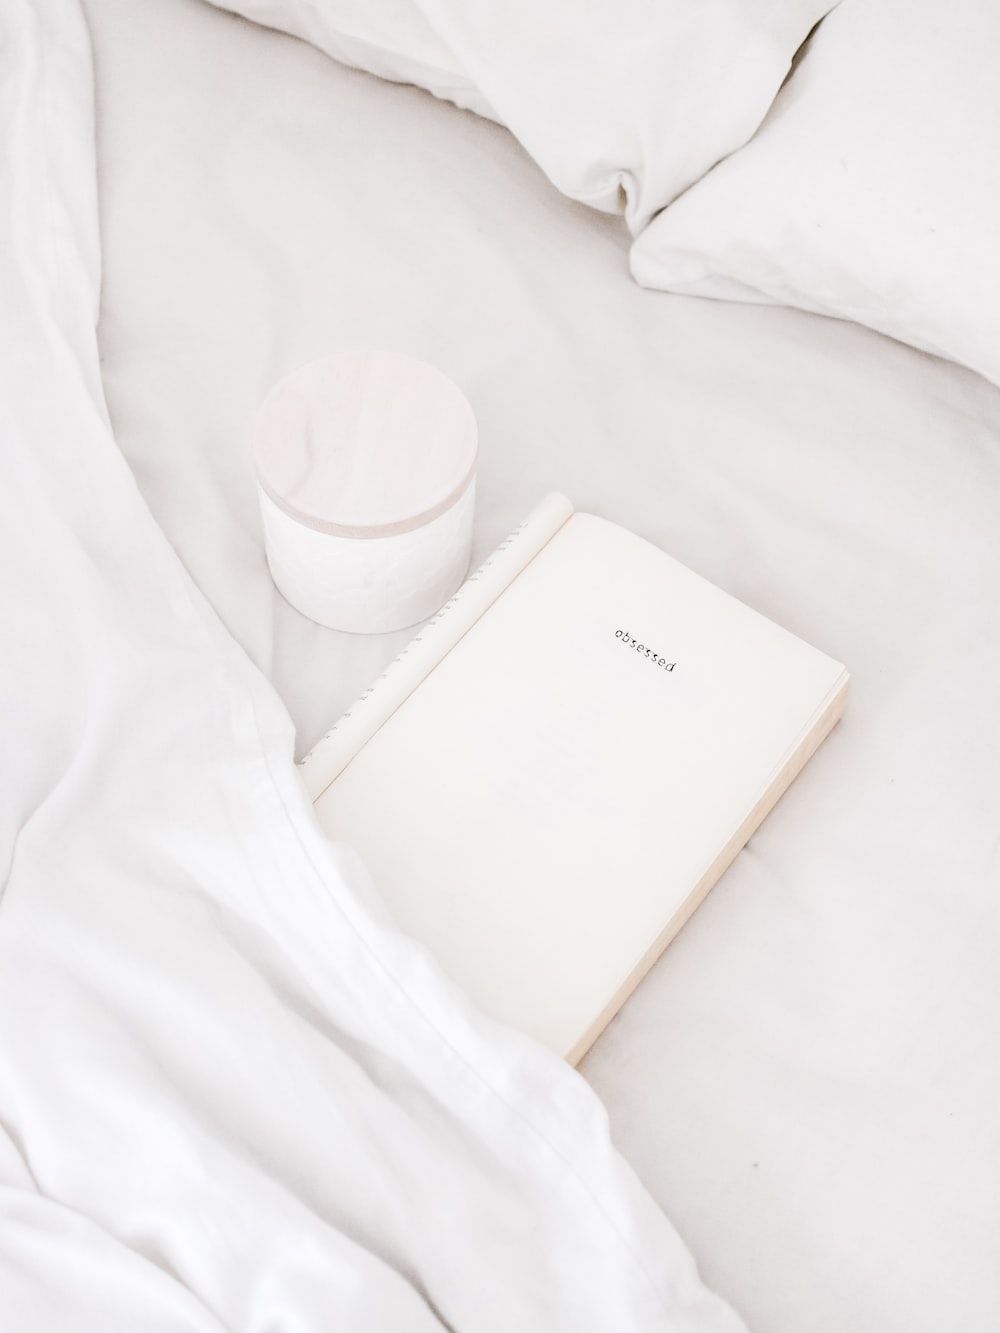 White notebook beside white cup on white bed sheet - White, cute white